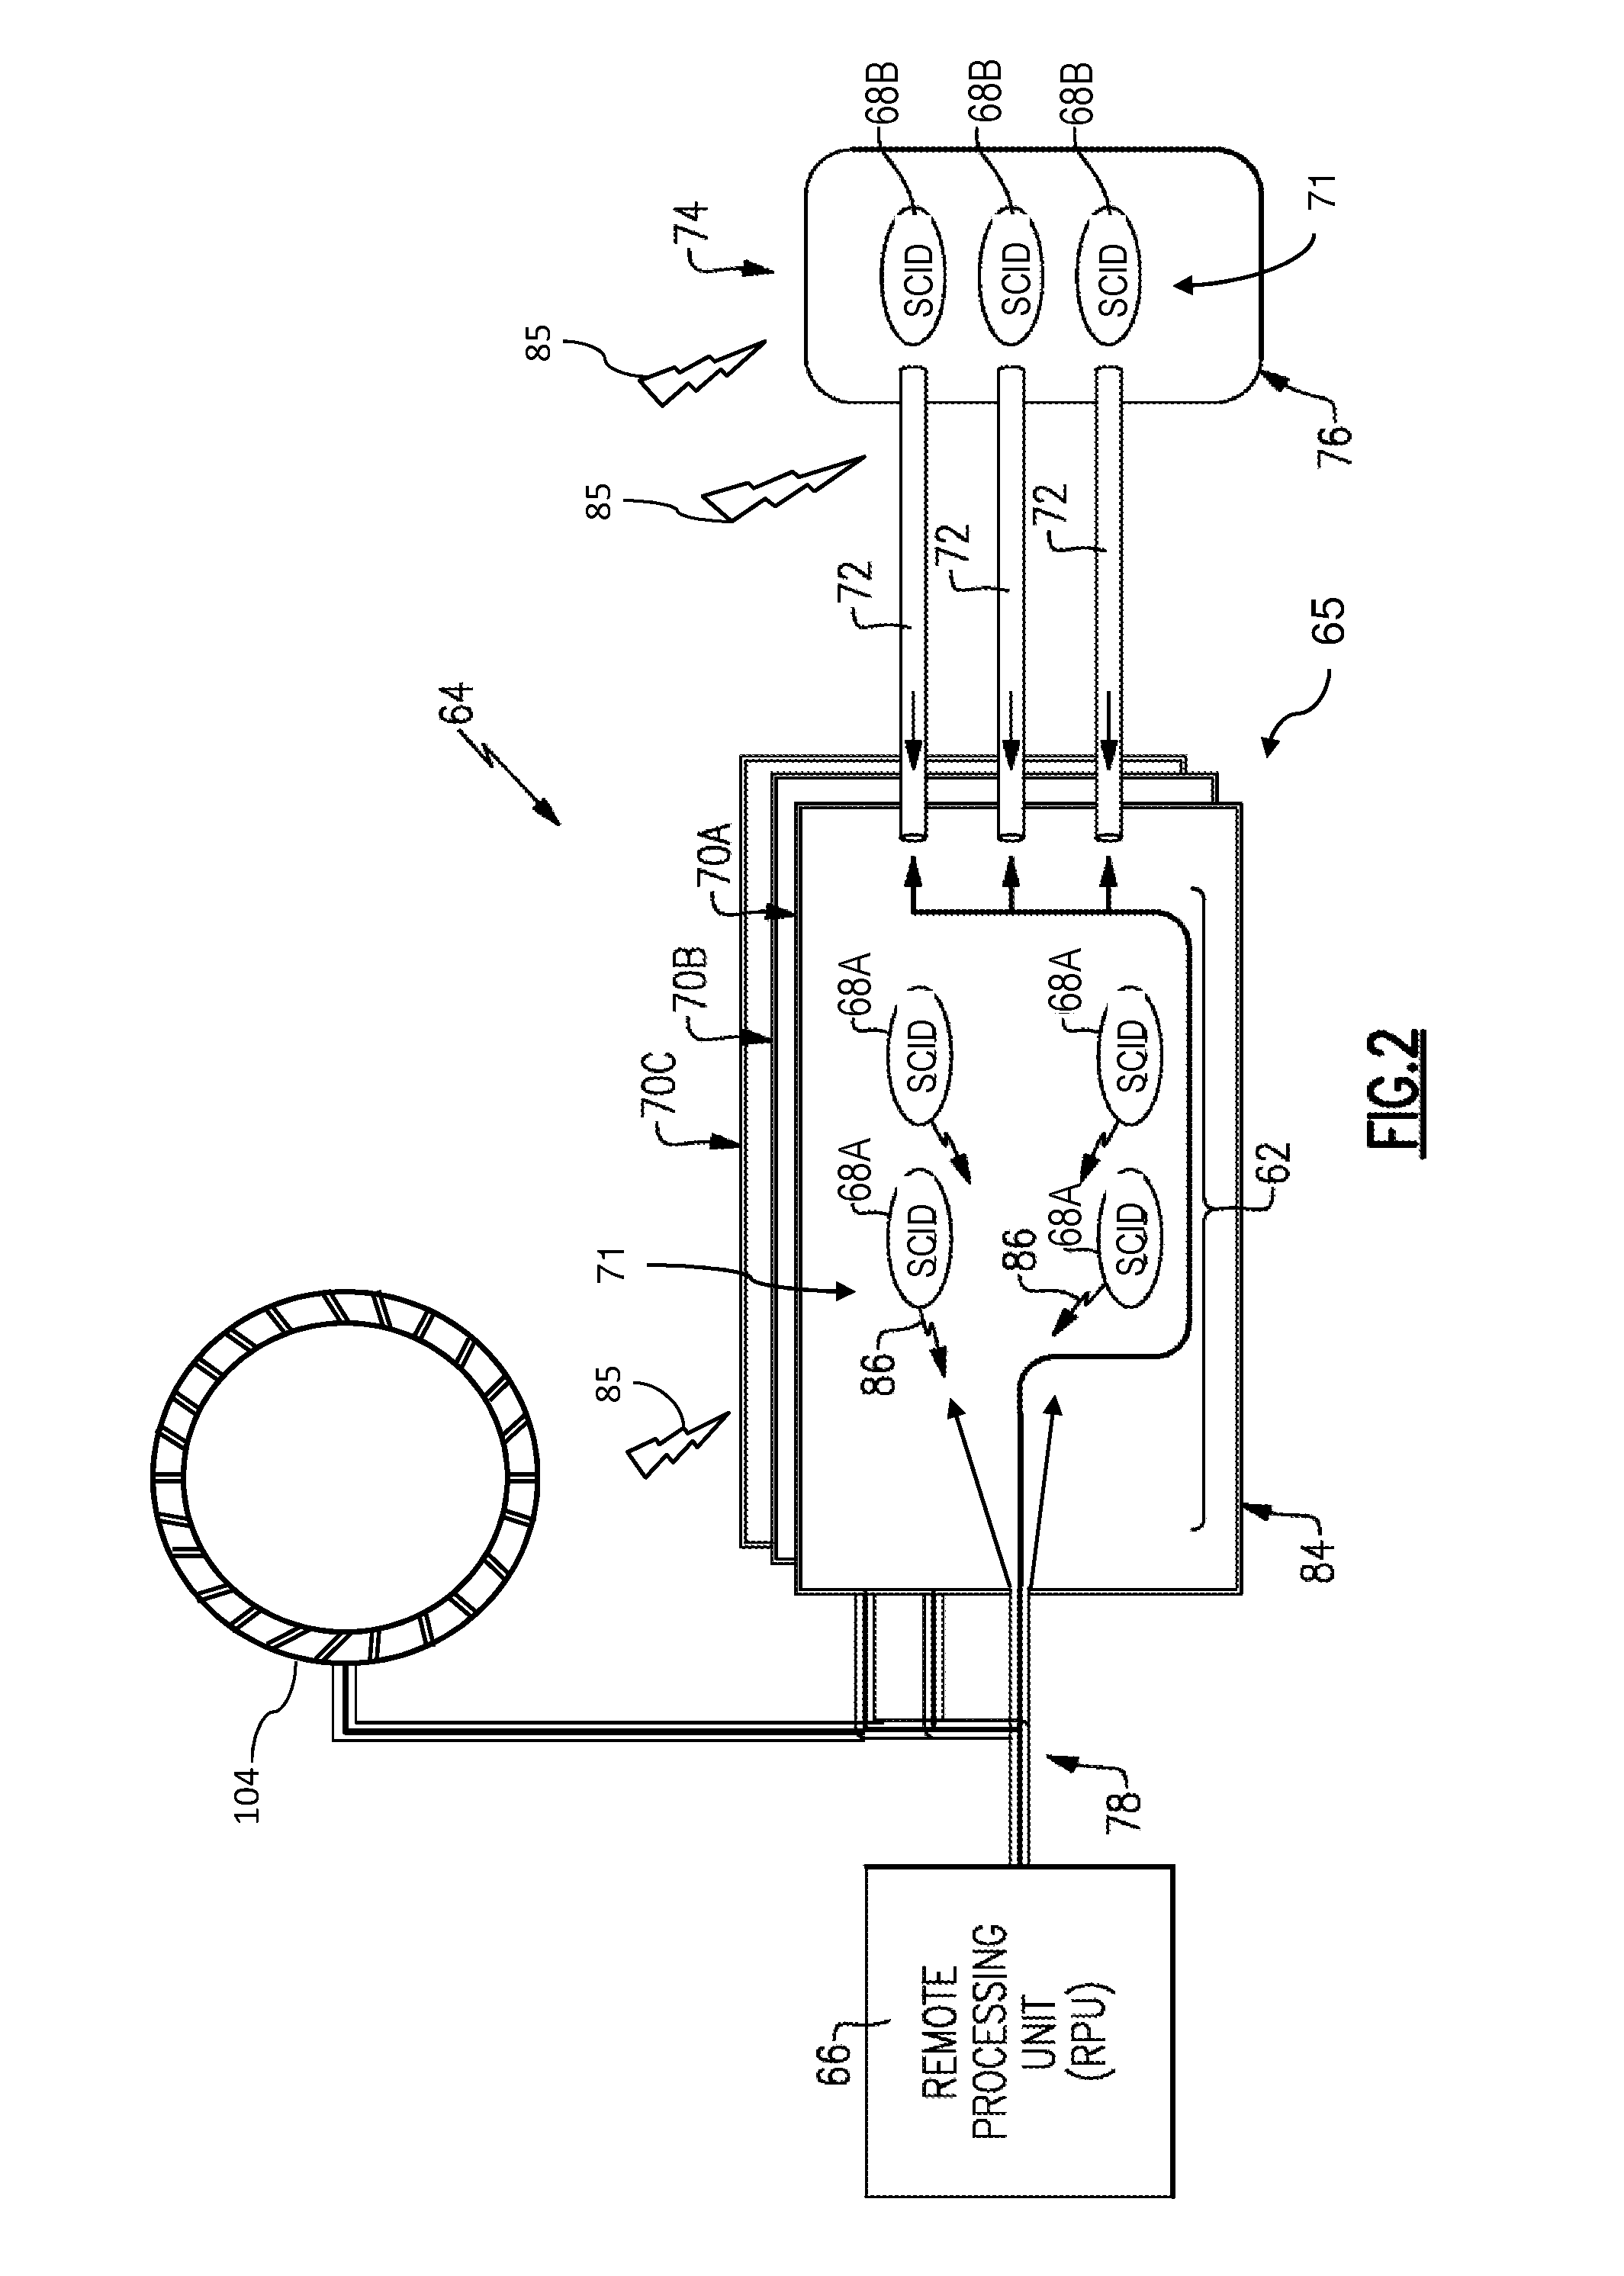 Multi-stage sensing/control/identification device having protected communication and remote power